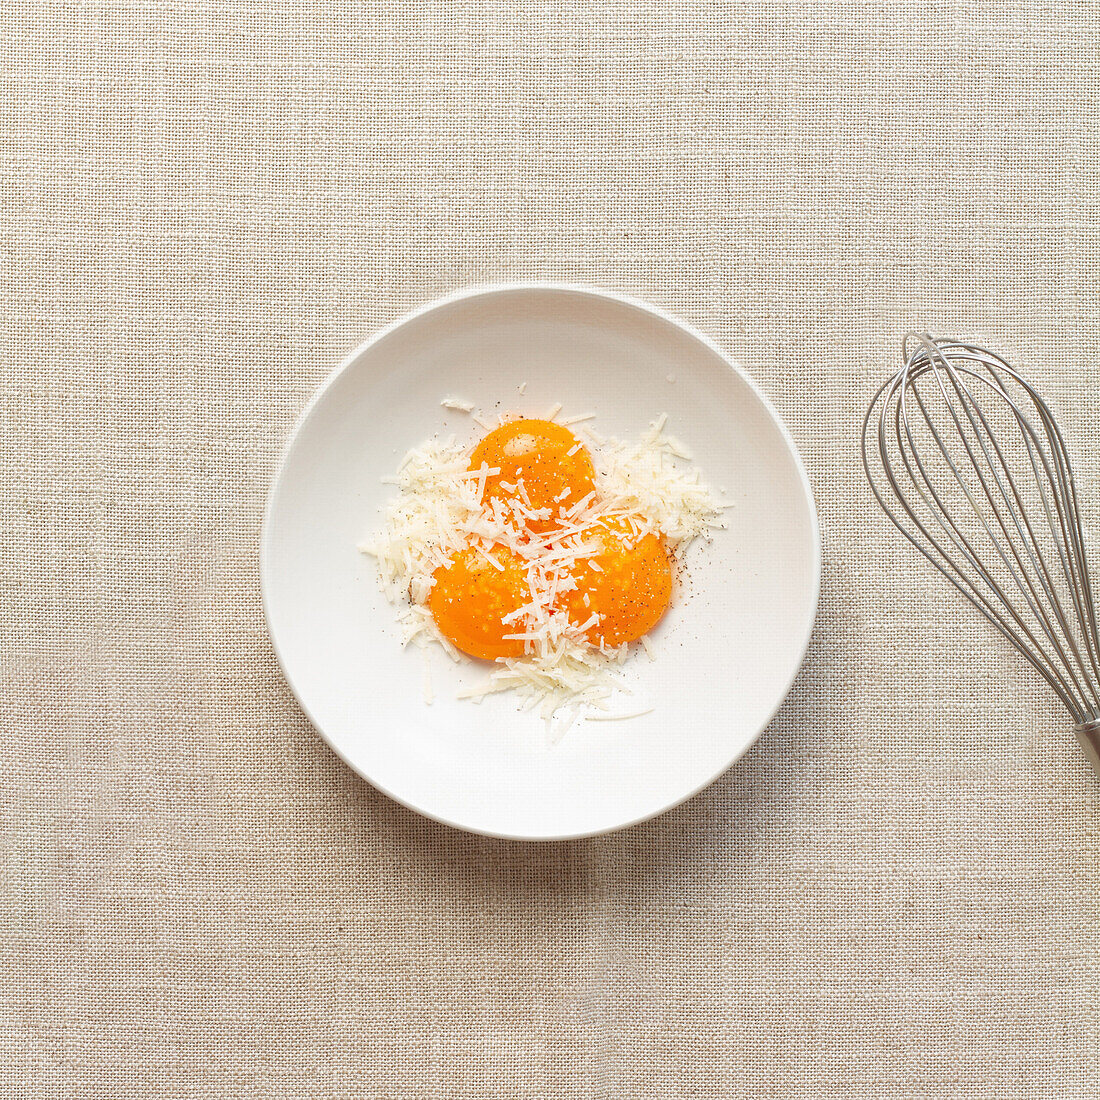 From above two raw egg yolks nestled in grated cheese with a whisk on the side, ready for making Spaghetti Carbonara.